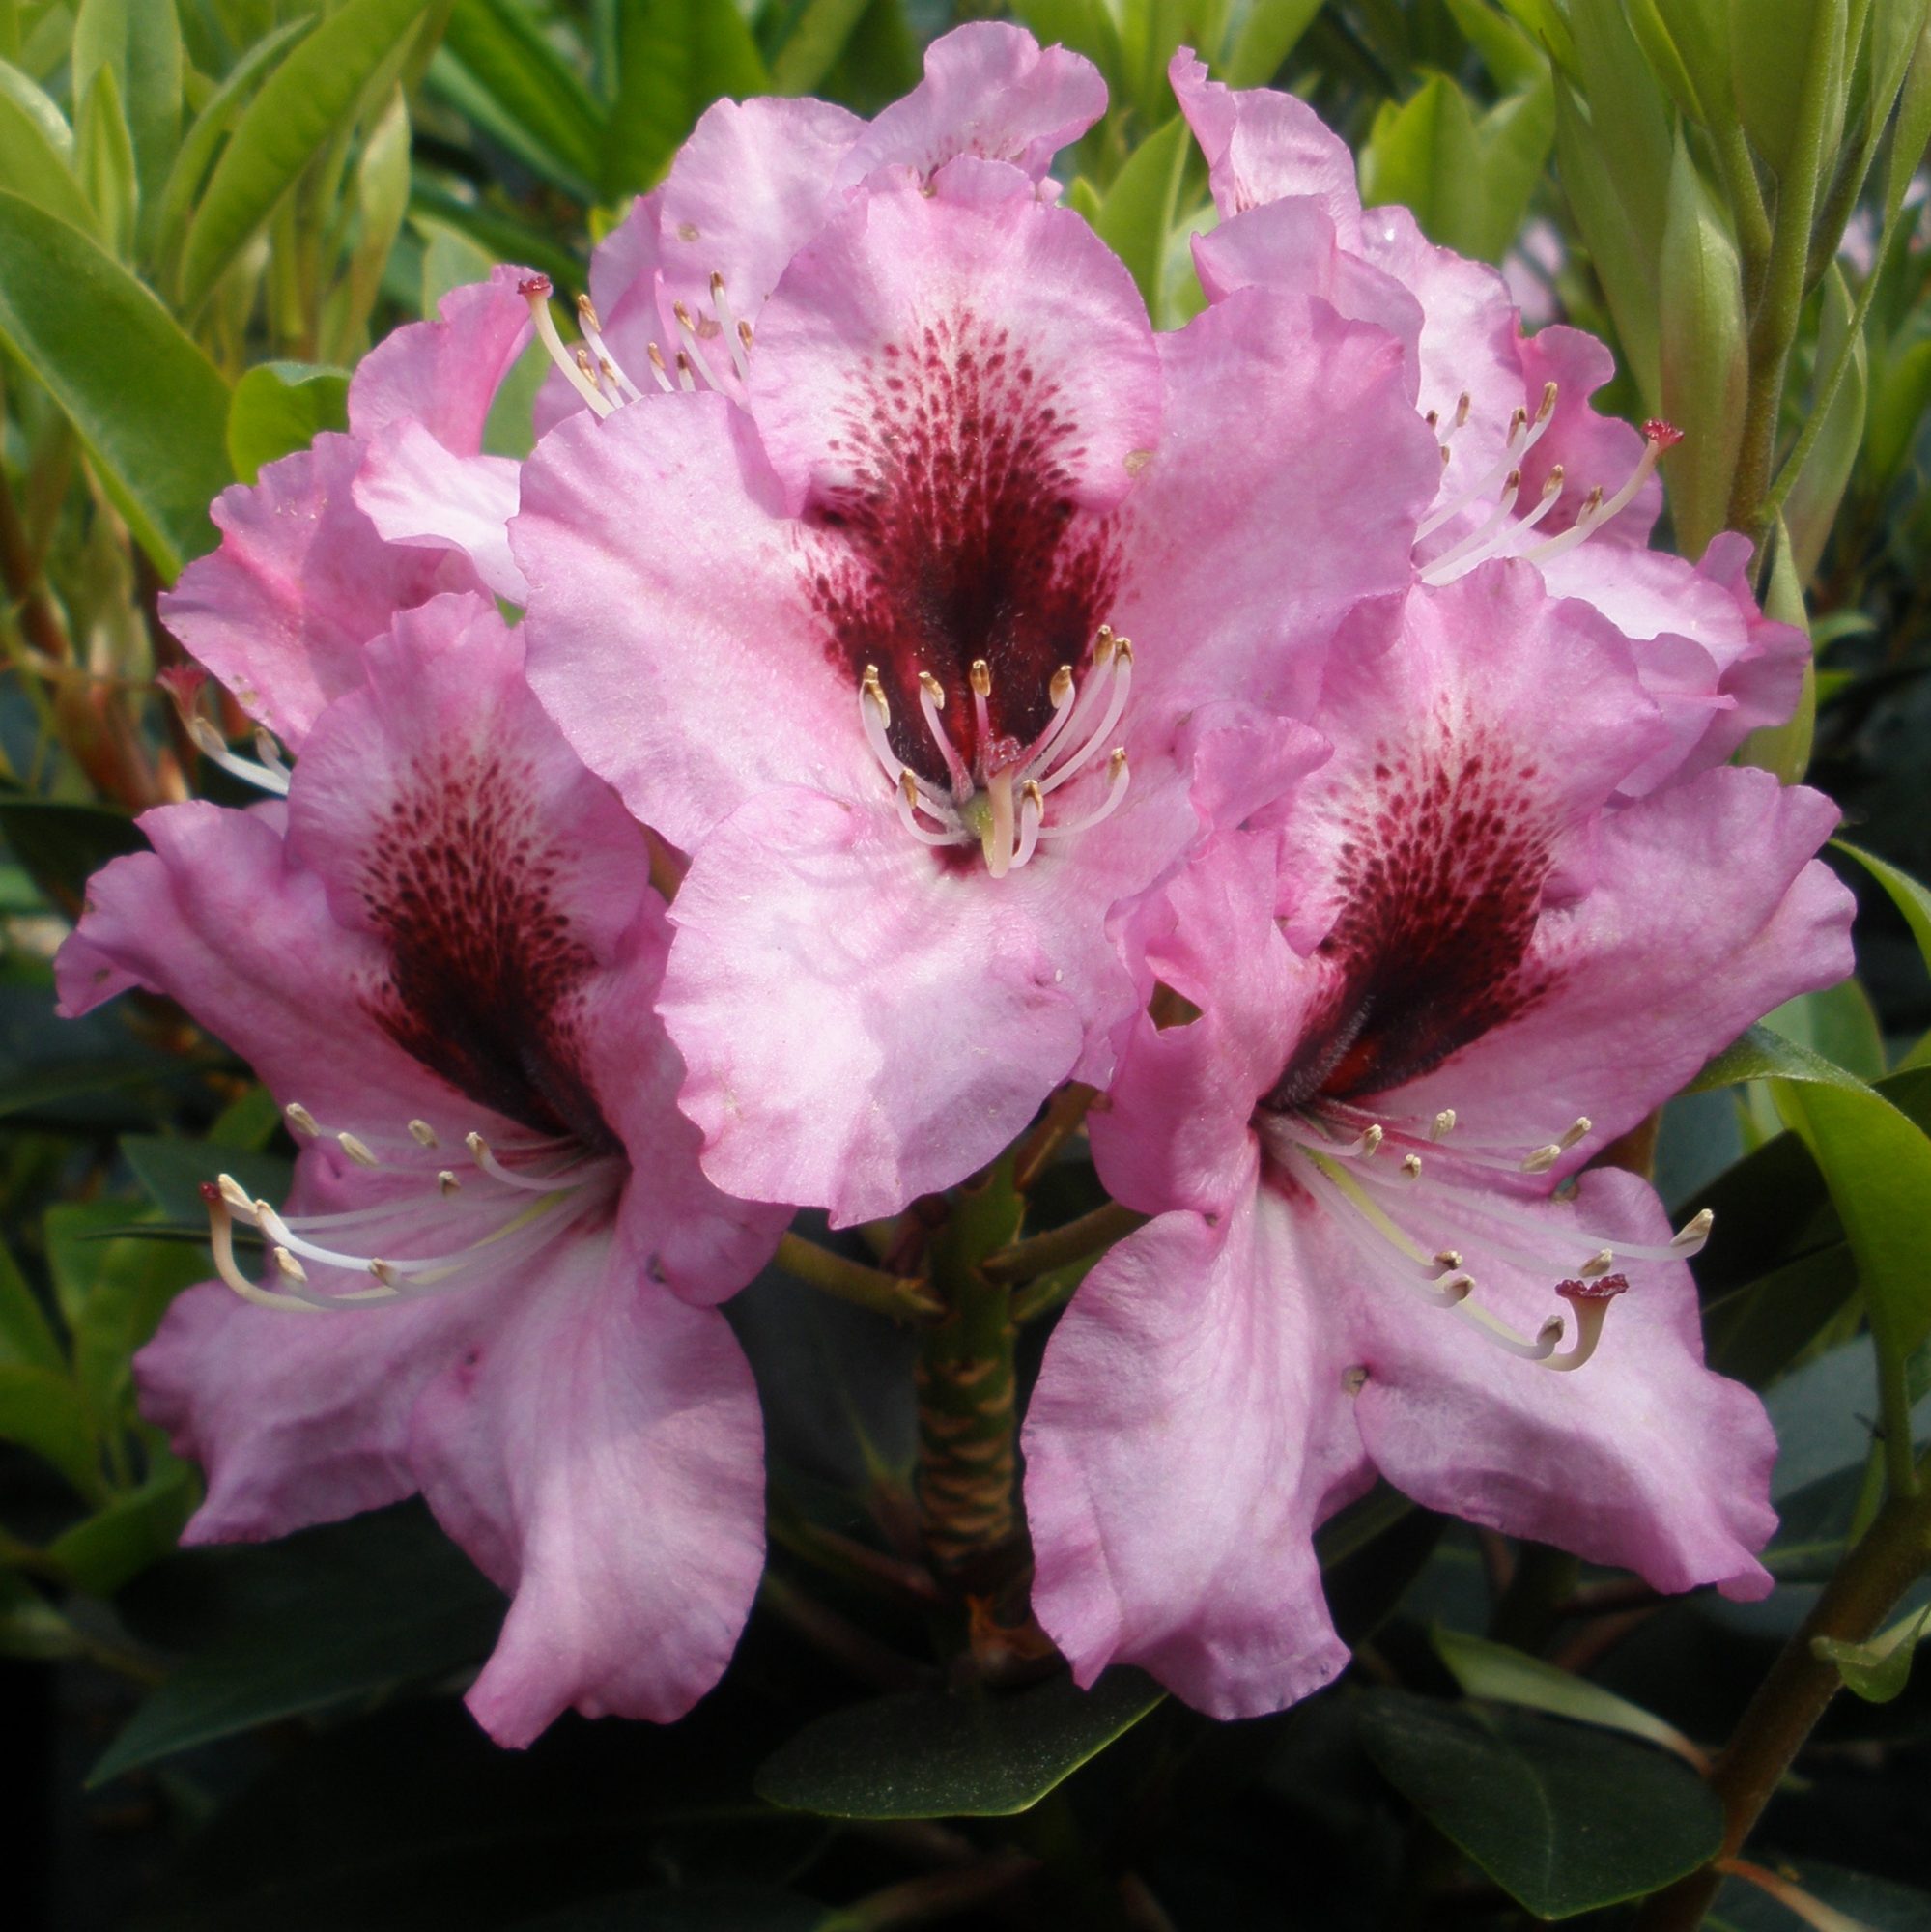 Best place to plant rhododendron Idea